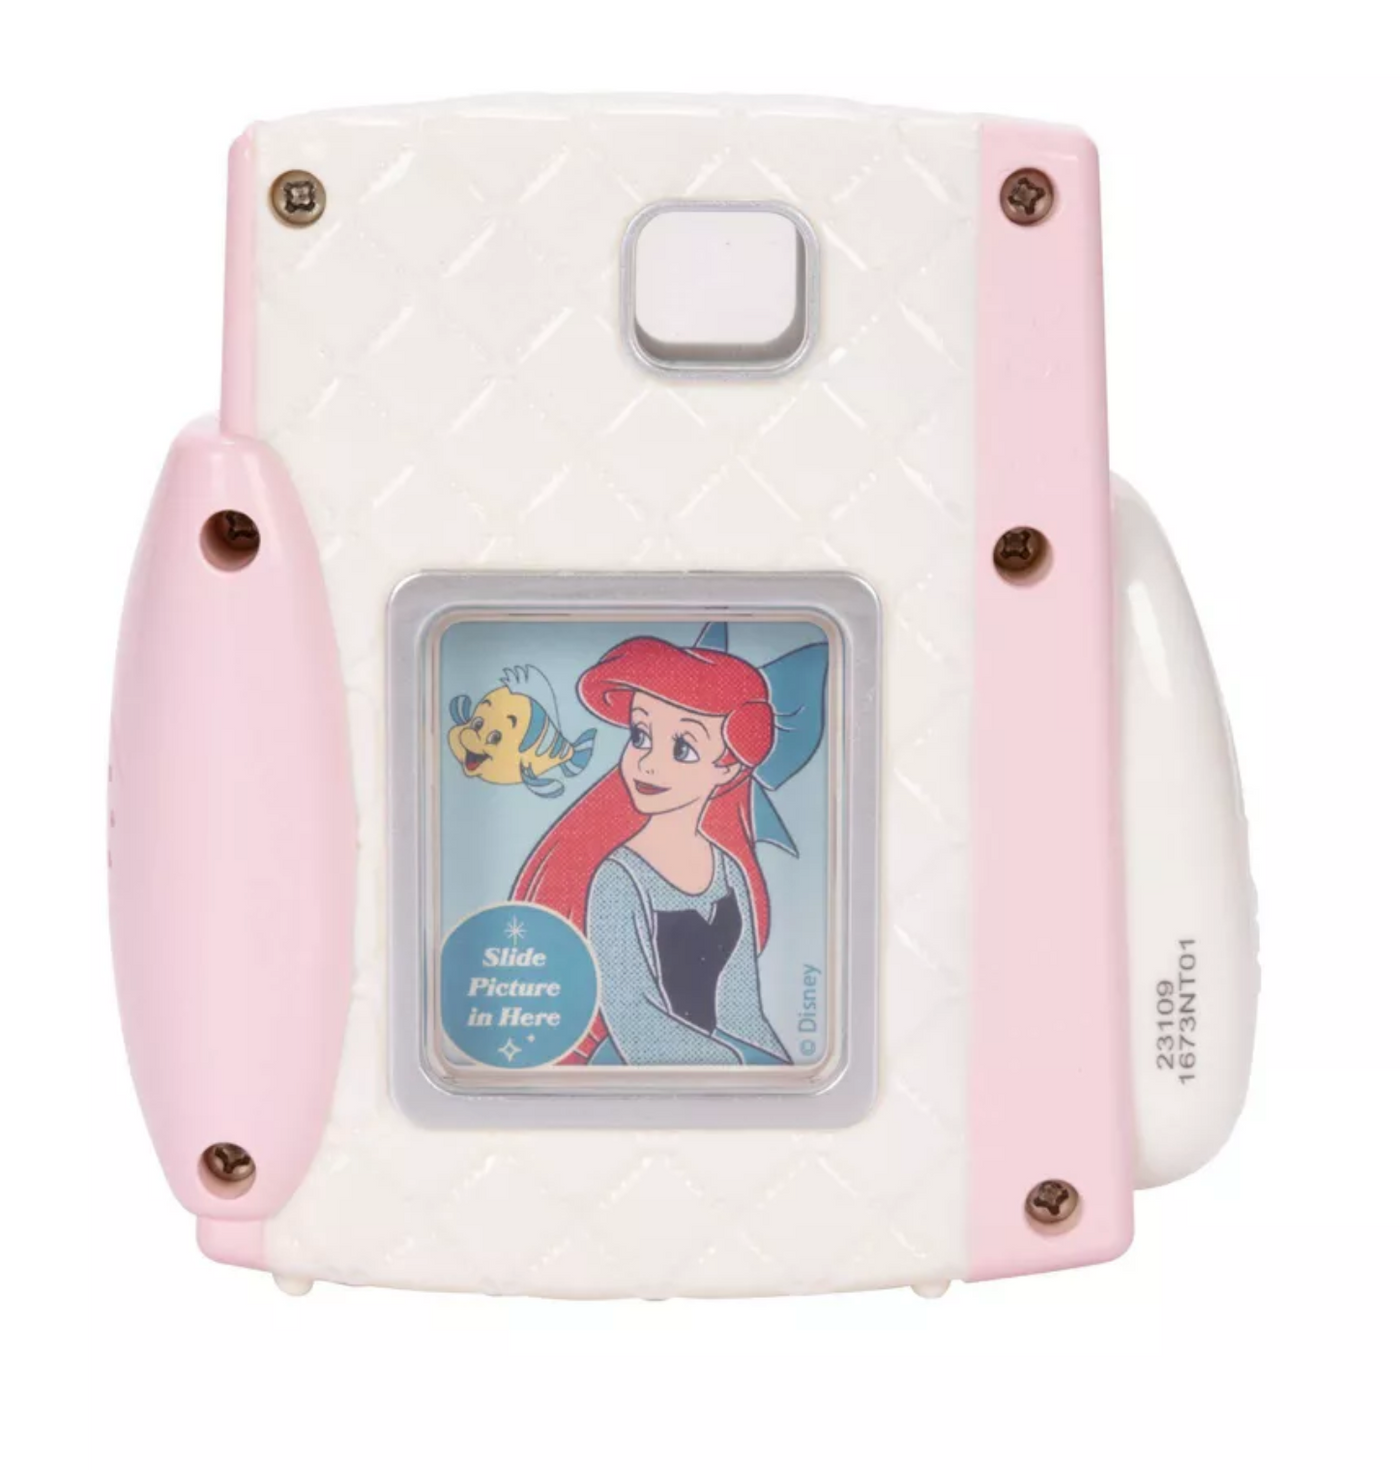 Disney 100 Retro Reimagined Princess Snap N Go Play Camera Toy New with Card